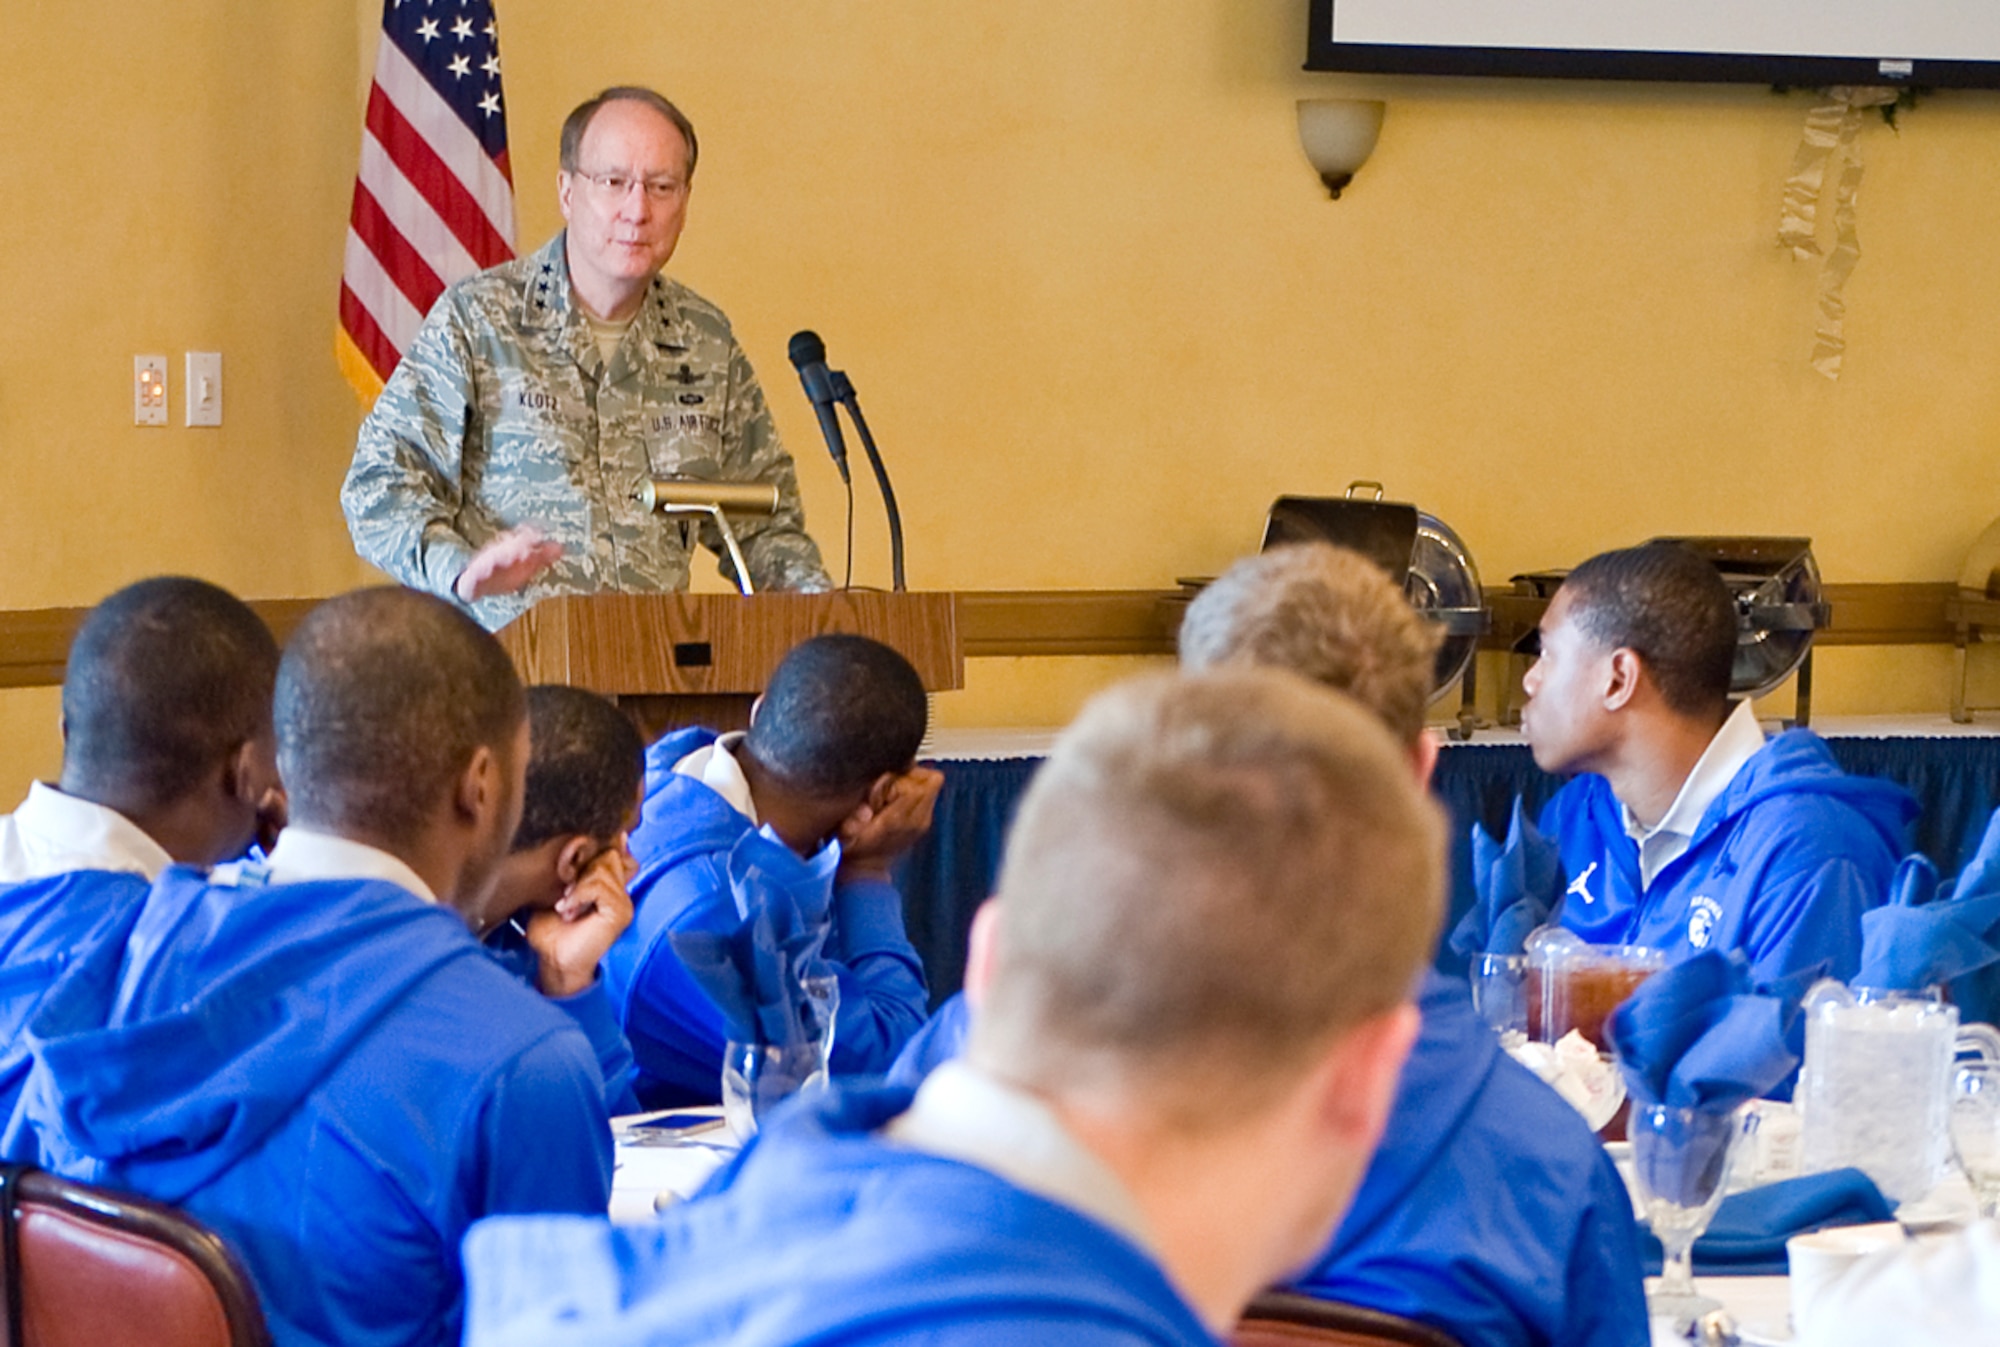 Lt. Gen. Frank G. Klotz speaks to members of the U.S. Air Force Academy football team and guests from Barksdale Air Force Base, La., during a lunch Dec. 23, 2010, on Barksdale AFB. General Klotz is the Air Force Global Strike Command commander and a 1973 distinguished graduate of the U.S. Air Force Academy. The team is in town for the Independence Bowl Dec. 27, 2010, where the Falcons will face the Georgia Tech Yellow Jackets. (U.S. Air Force photo/Senior Airman Chad Warren)